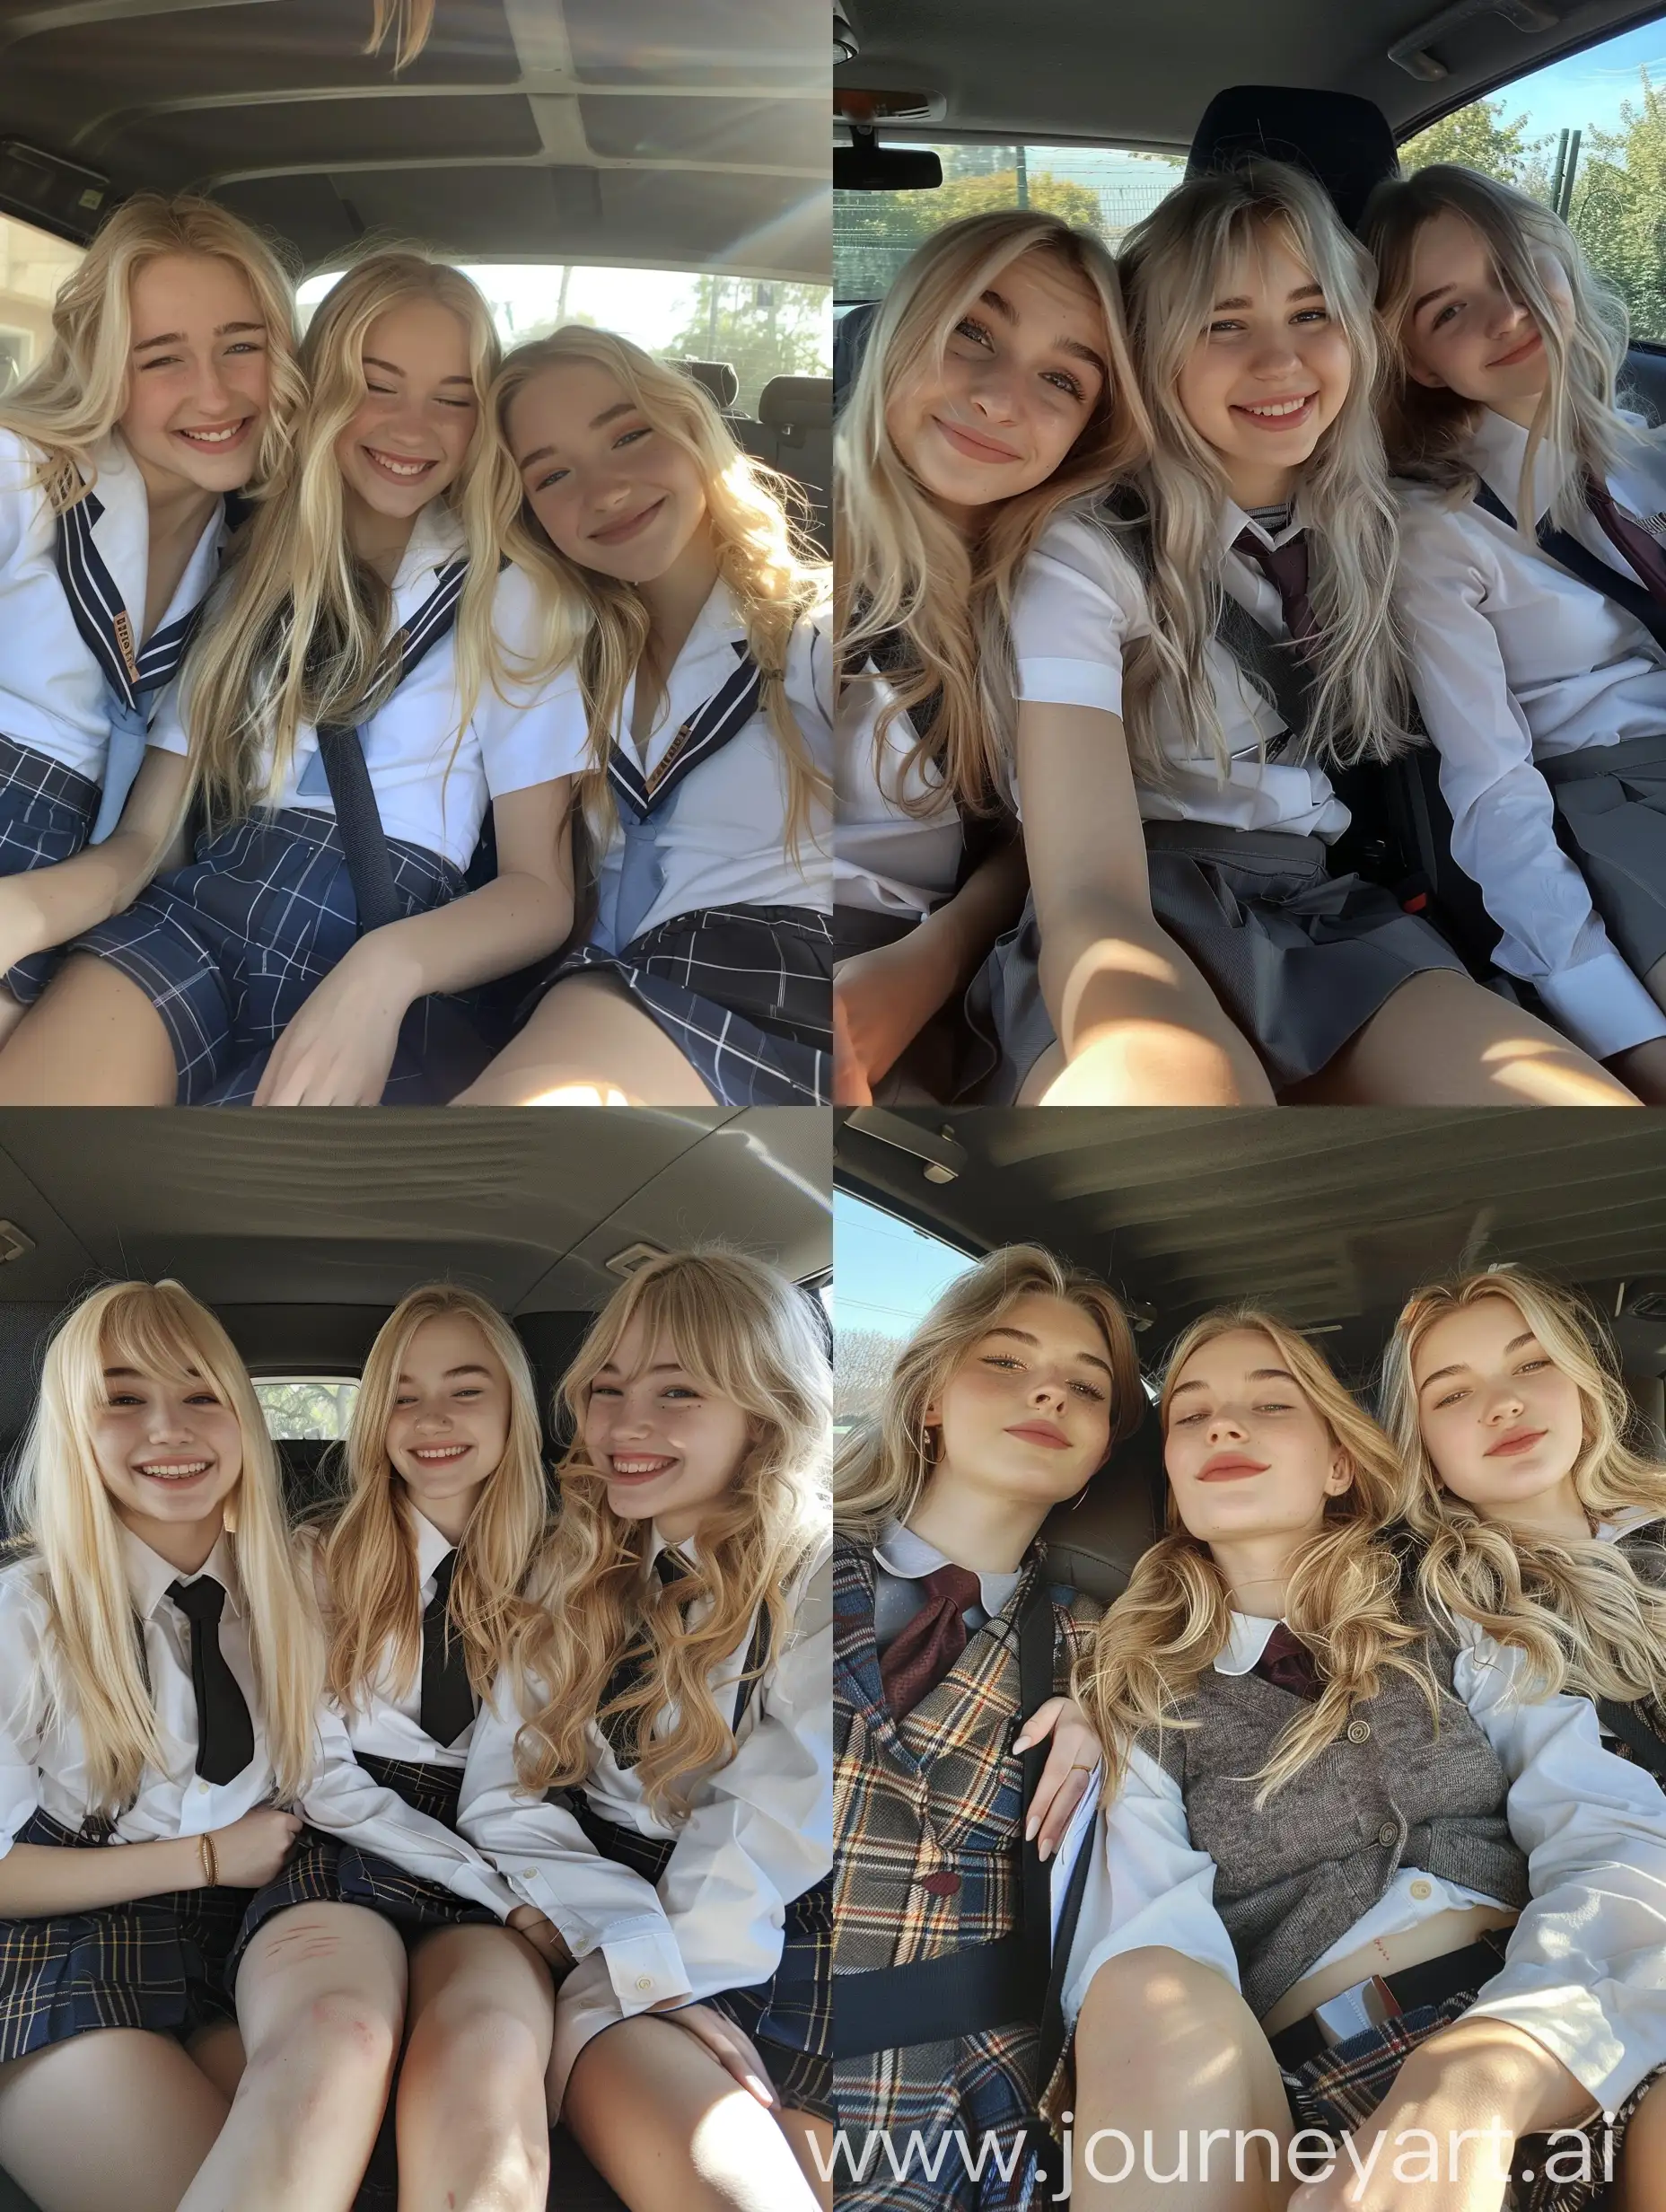 Three-Girls-in-School-Uniforms-Smiling-Inside-Car-Natural-iPhone-Photo